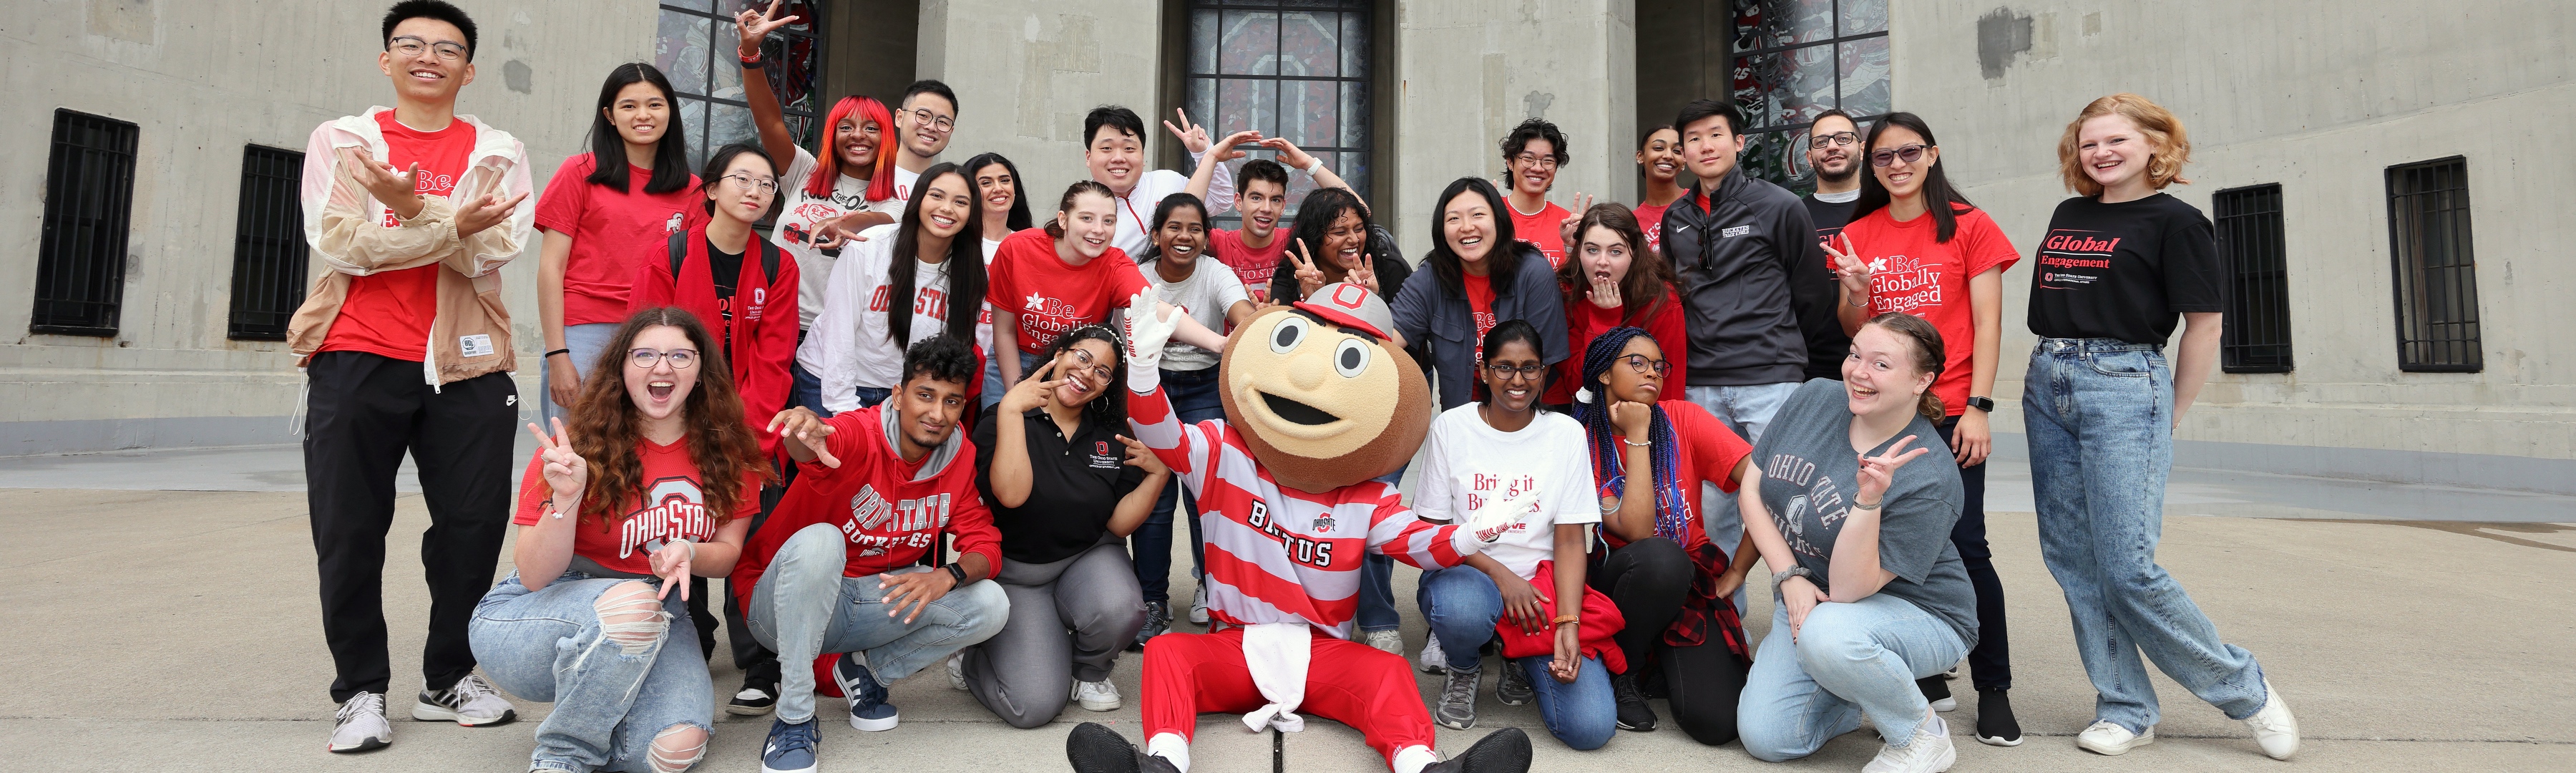 A group of students posing with Brutus in front of Ohio Stadium.